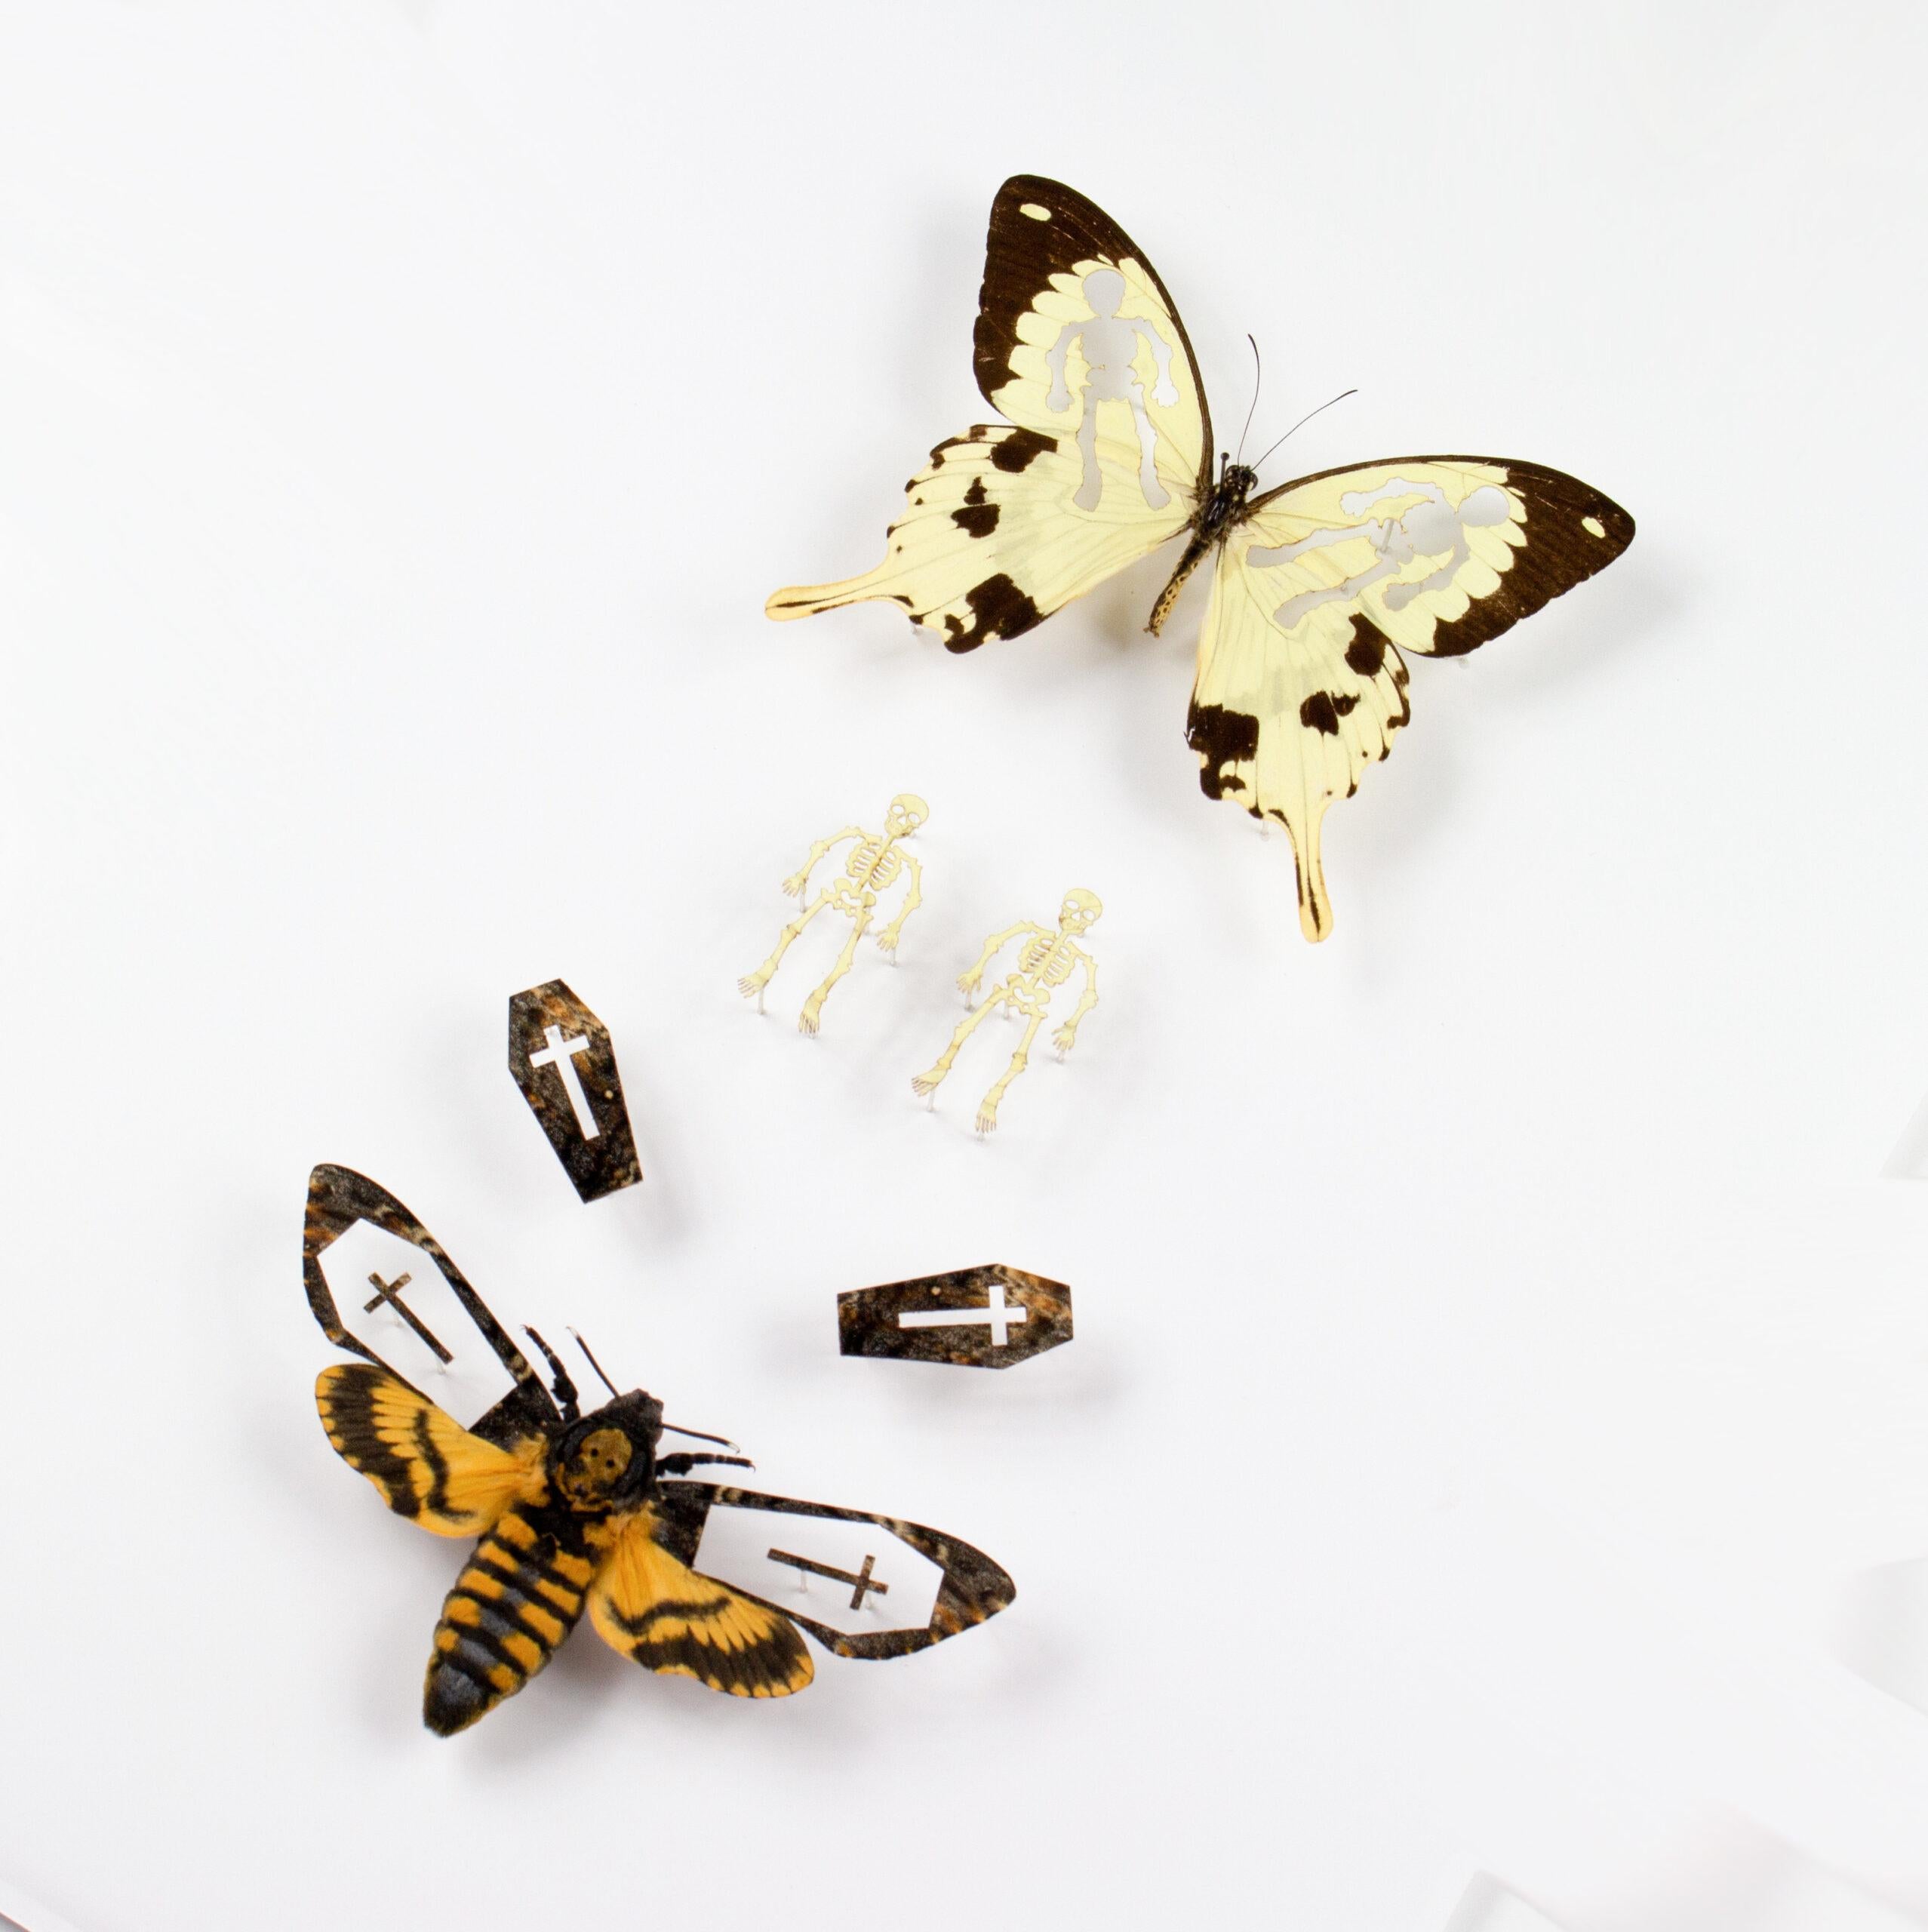 Memento Mori by Fiona Parkinson features the stunning Deaths Head Hawkmoth, famed by Silence of the Lambs, perfectly preserved and designed as coffins along with butterfly skeletons.

Memento Mori is one of Fiona’s most sought after, but tricky to